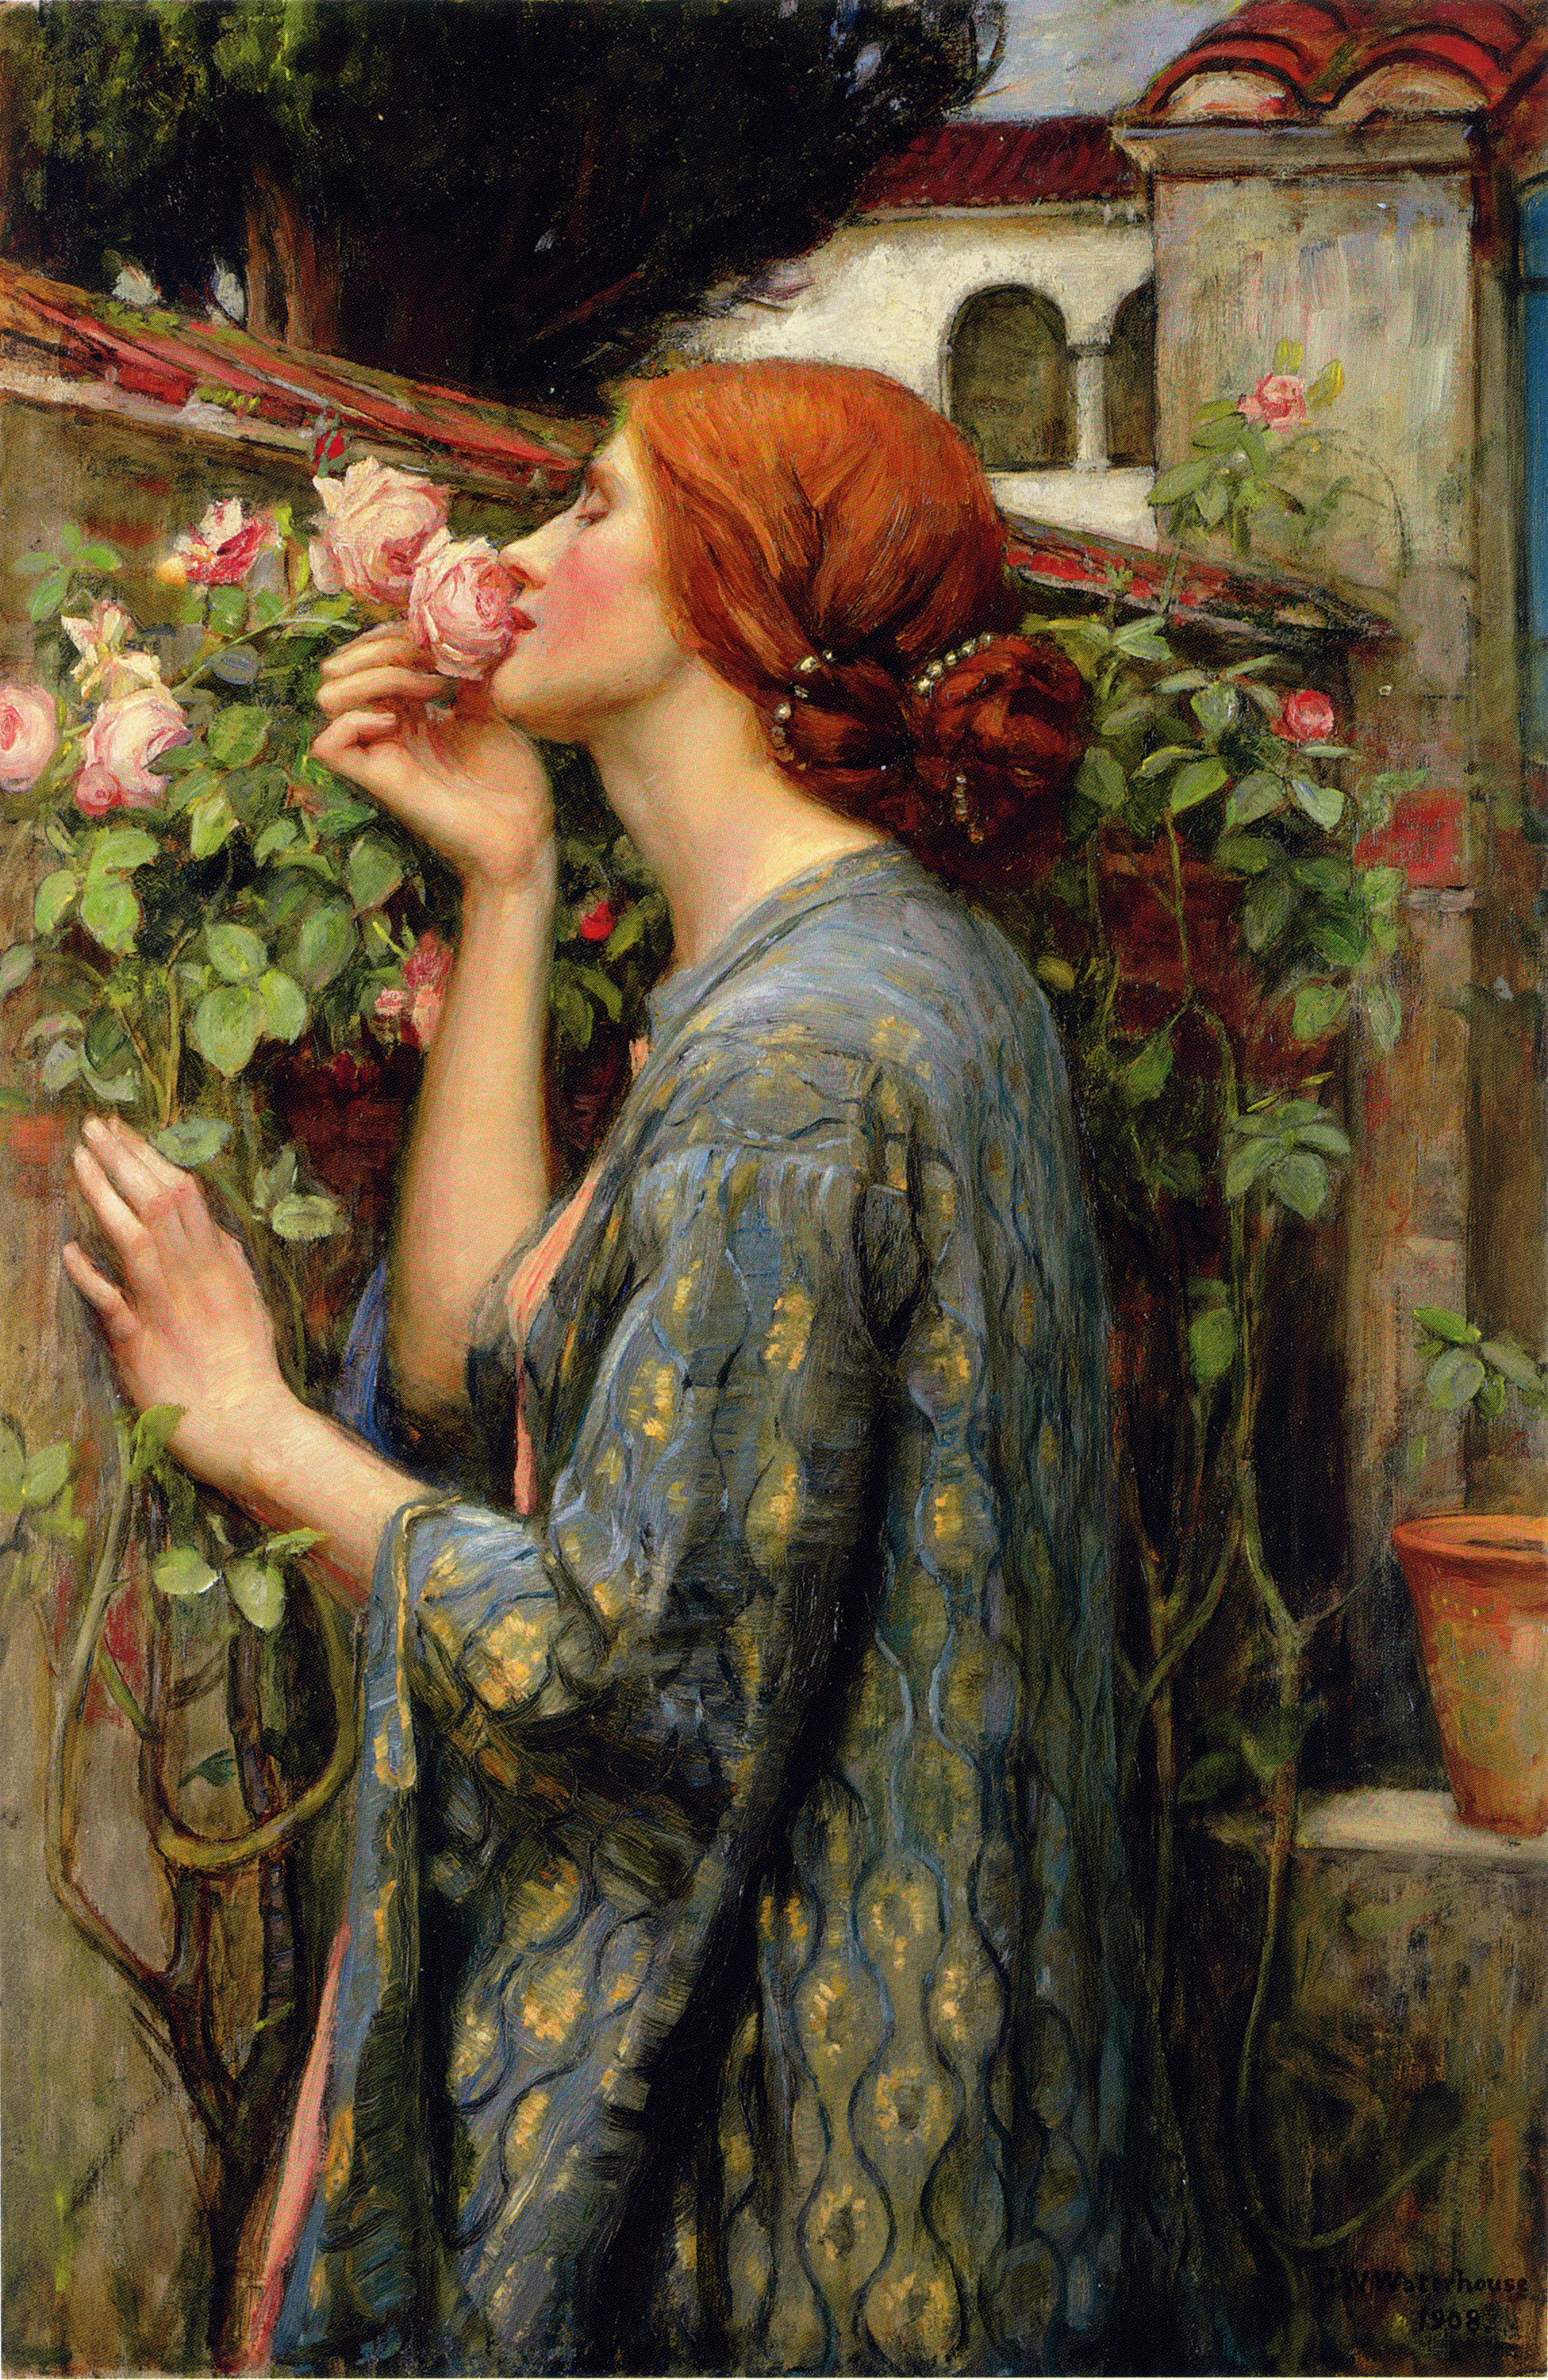 The Soul of the Rose by John William Waterhouse - 1903 - 88.3 x 59.1 cm private collection